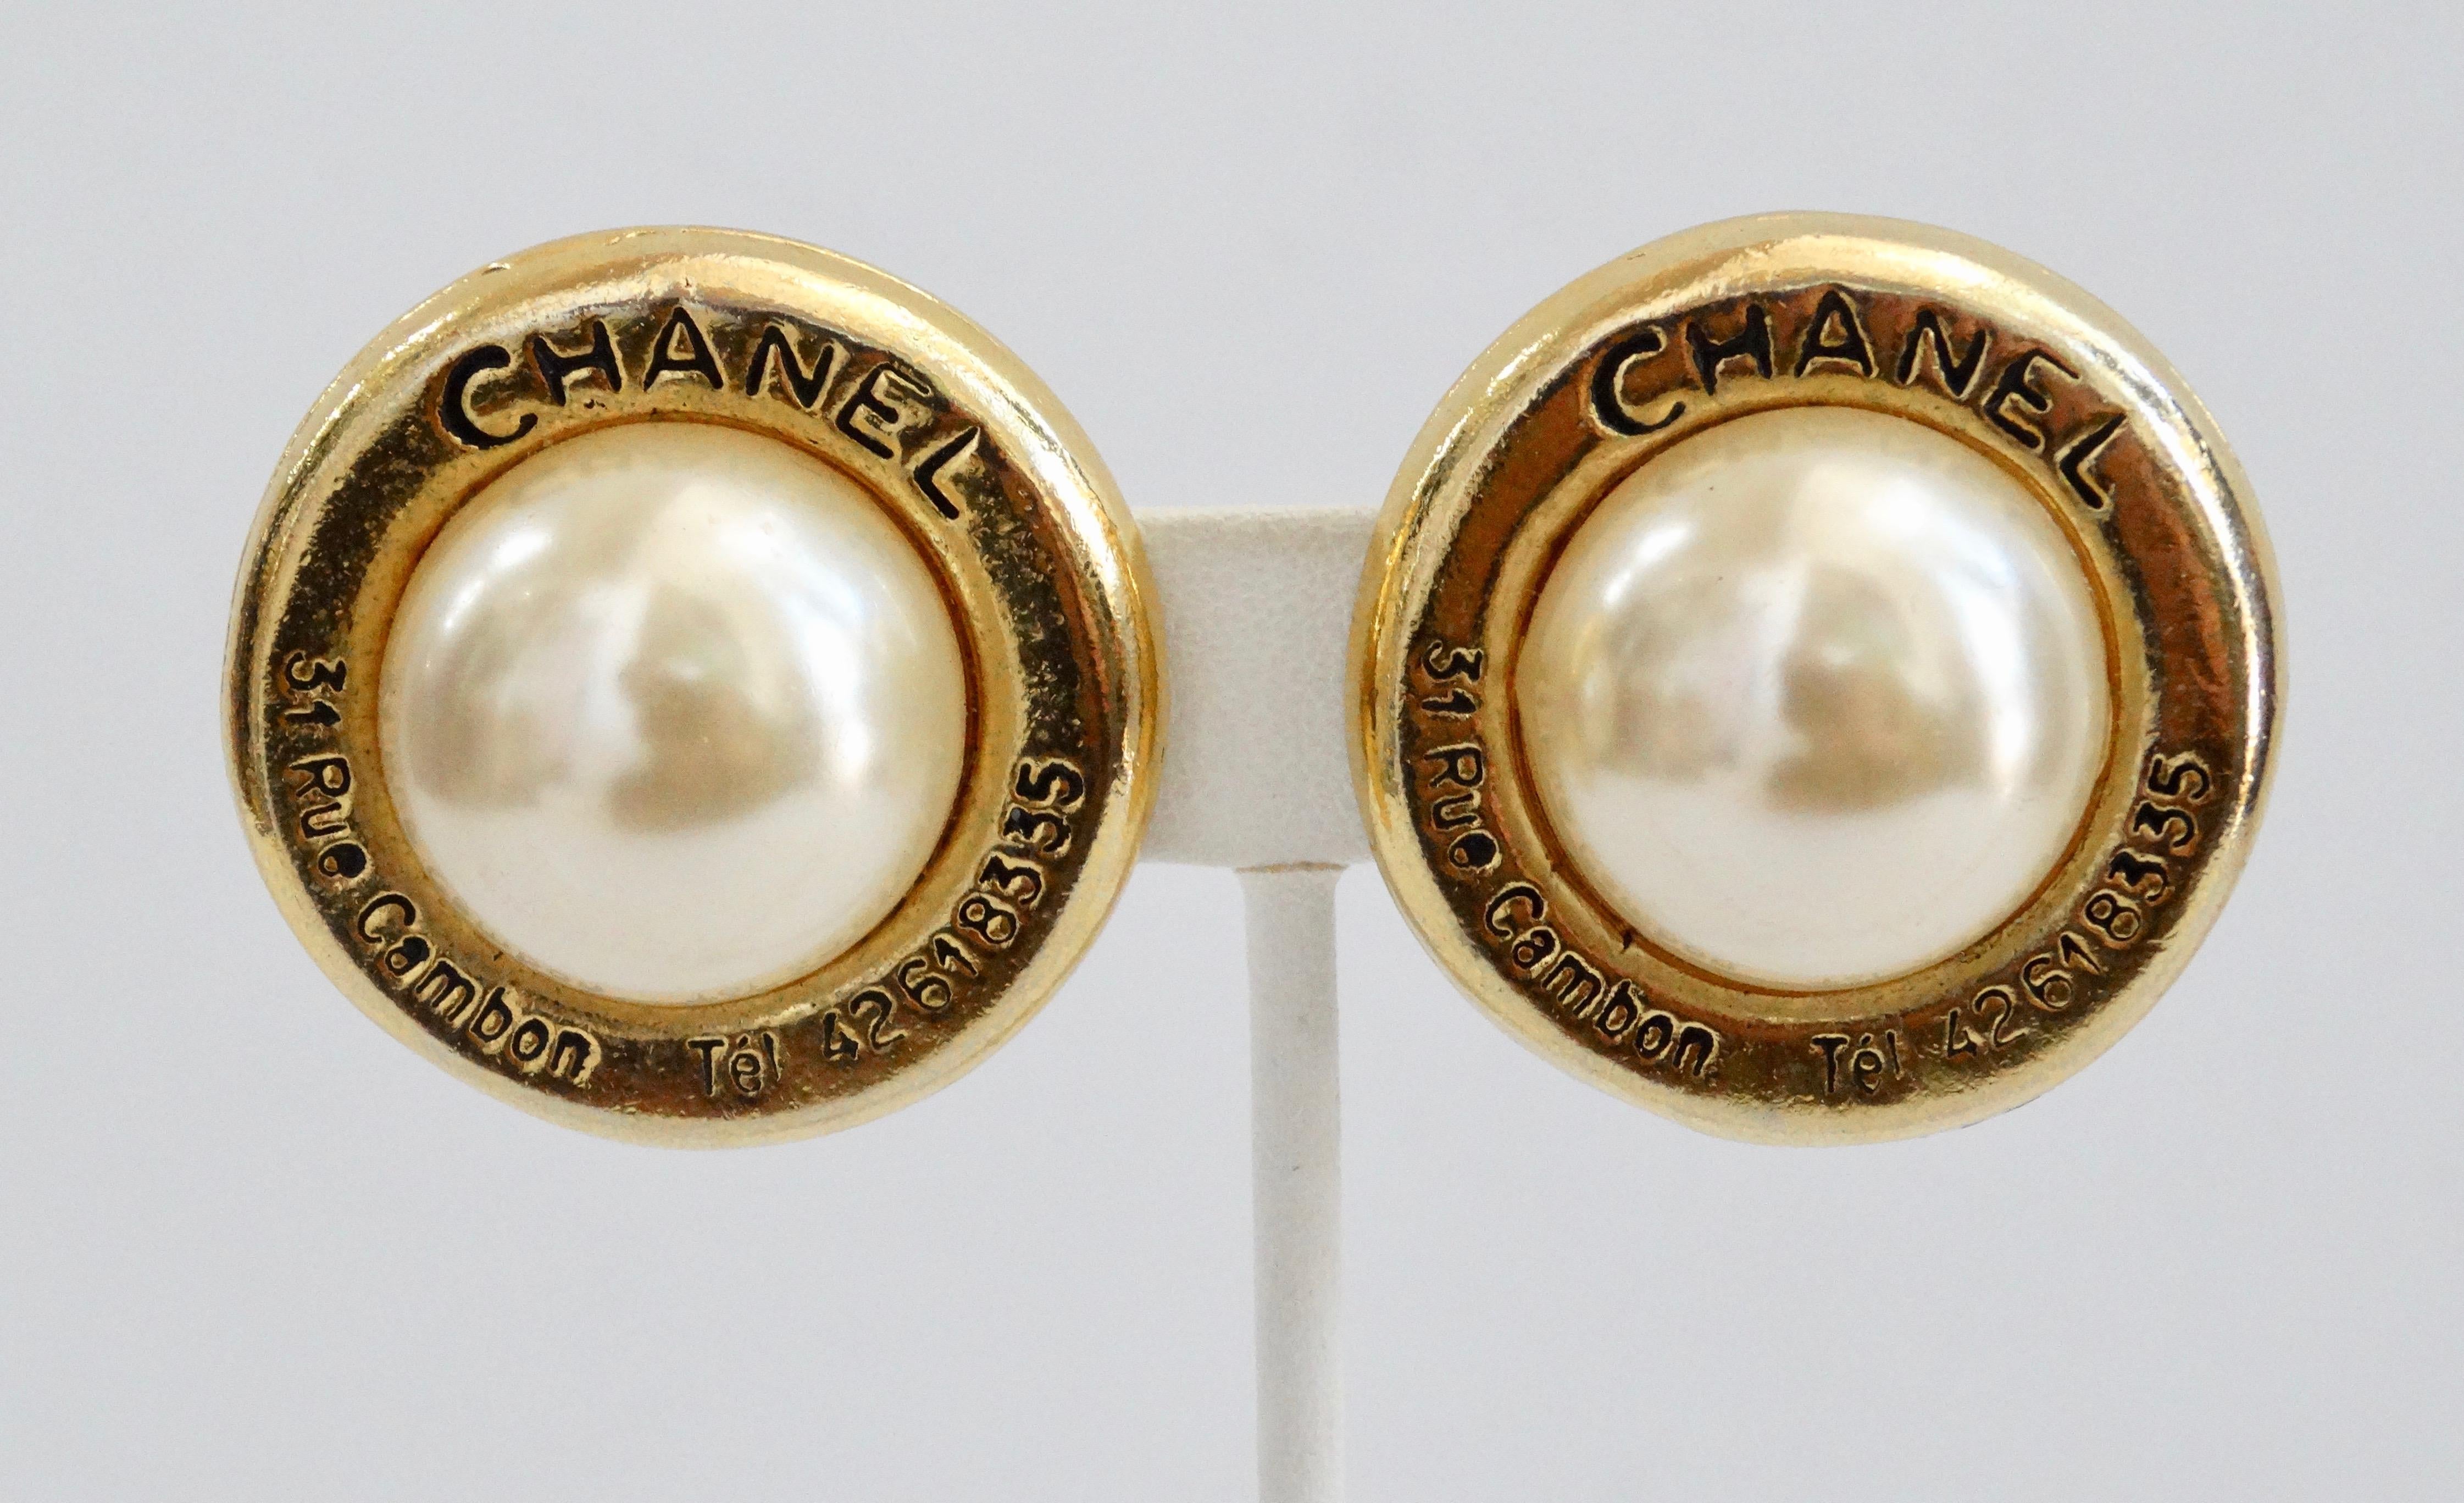 Complete your jewelry collection with these Chanel earrings! Circa 1980s, these classic earrings are gold plated, set with a large faux pearl and are embossed with the Chanel address and telephone number. Includes clip-on closures and are stamped